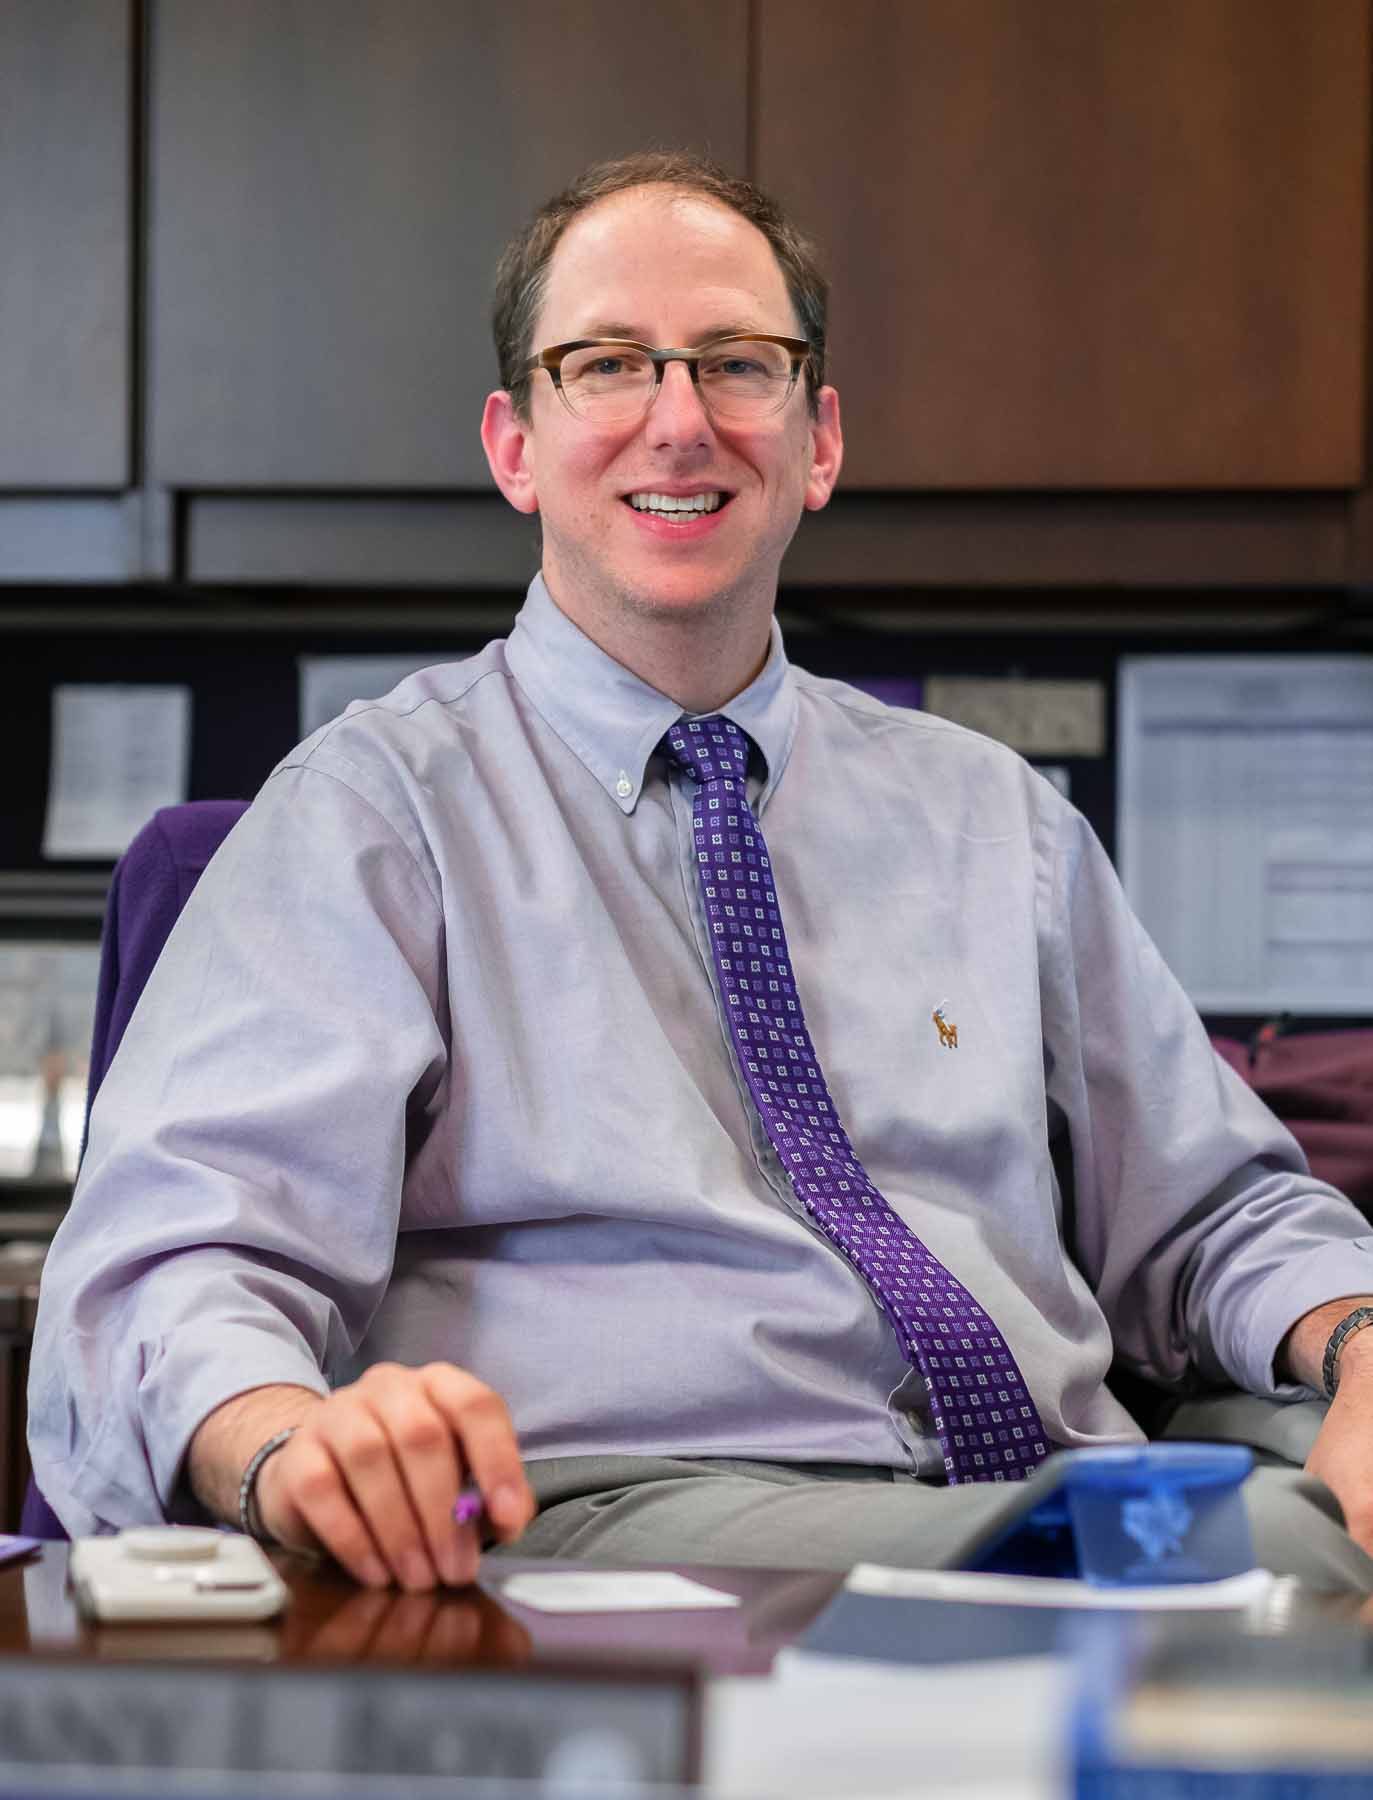 Tcu Dean Of Admission Promotes Diversity Equity And Inclusion